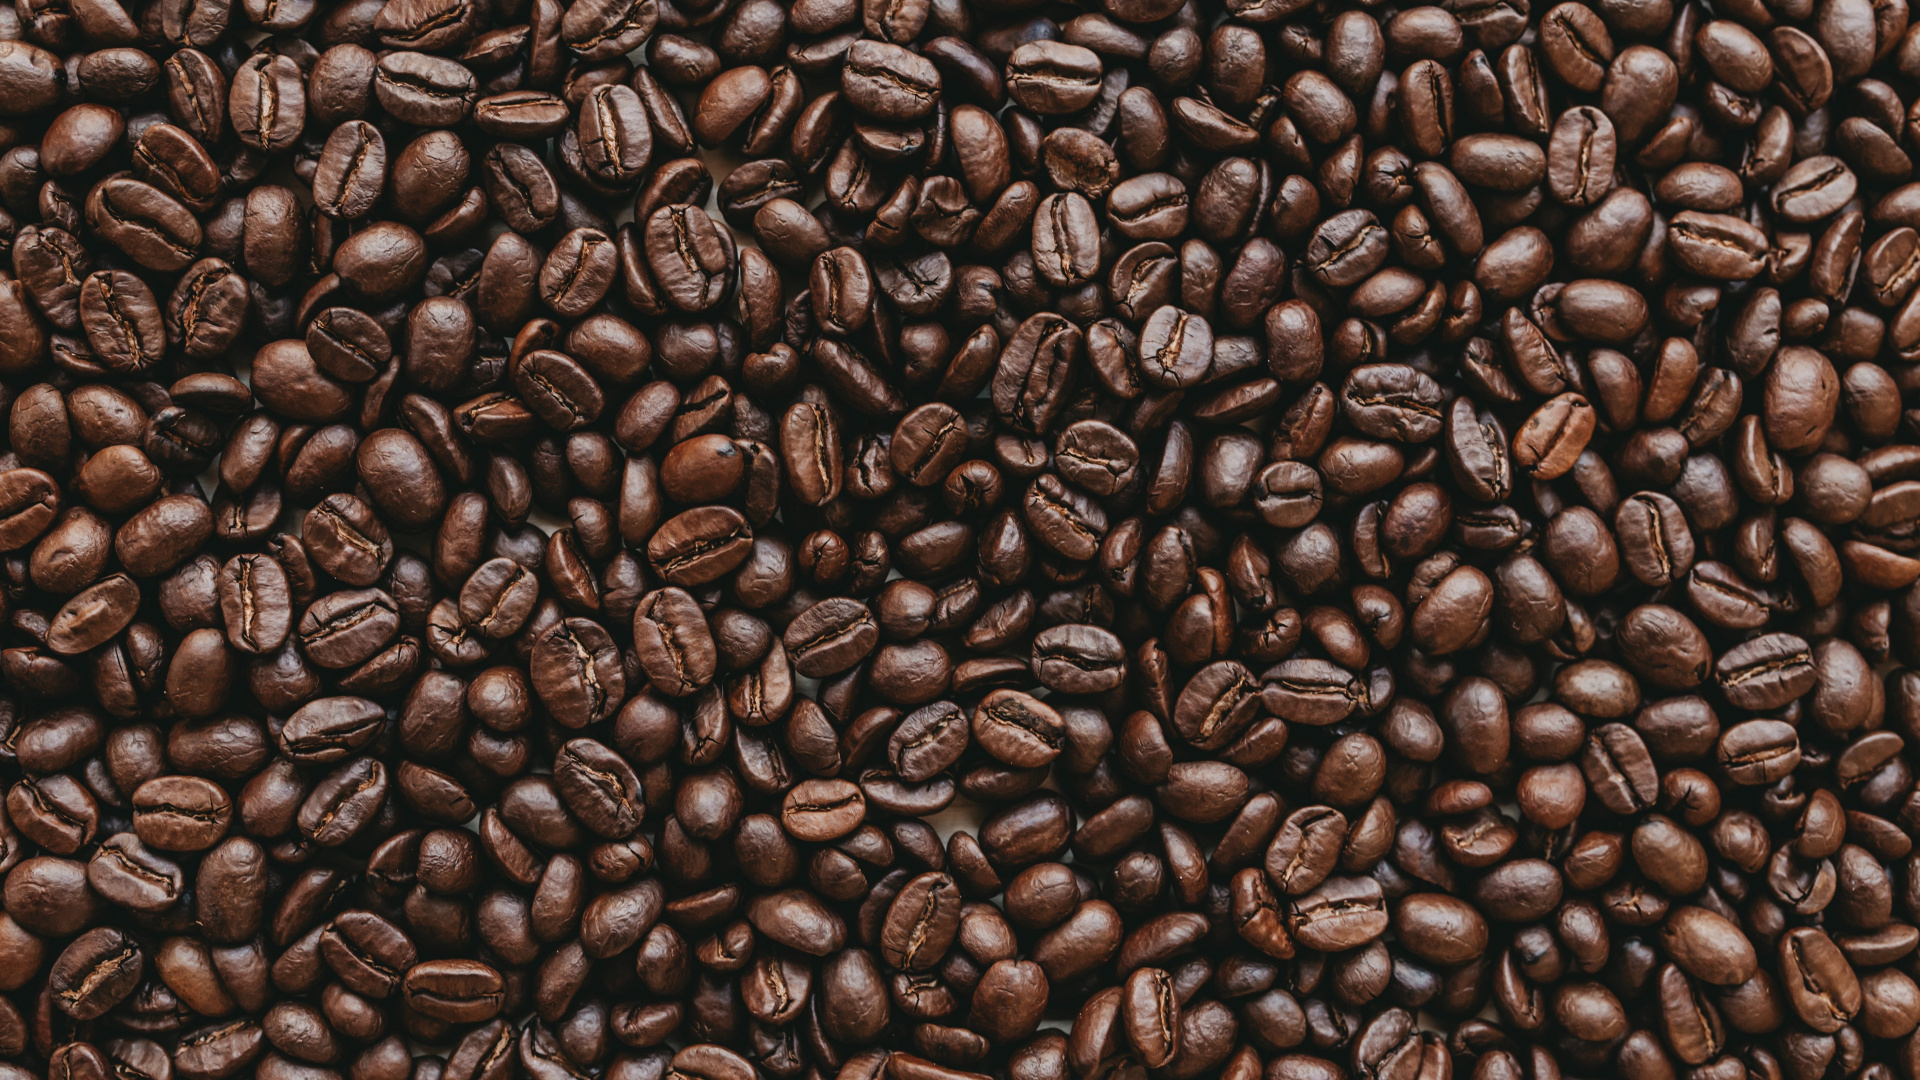 Coffee Beans on Brown Wooden Surface. Wallpaper in 1920x1080 Resolution